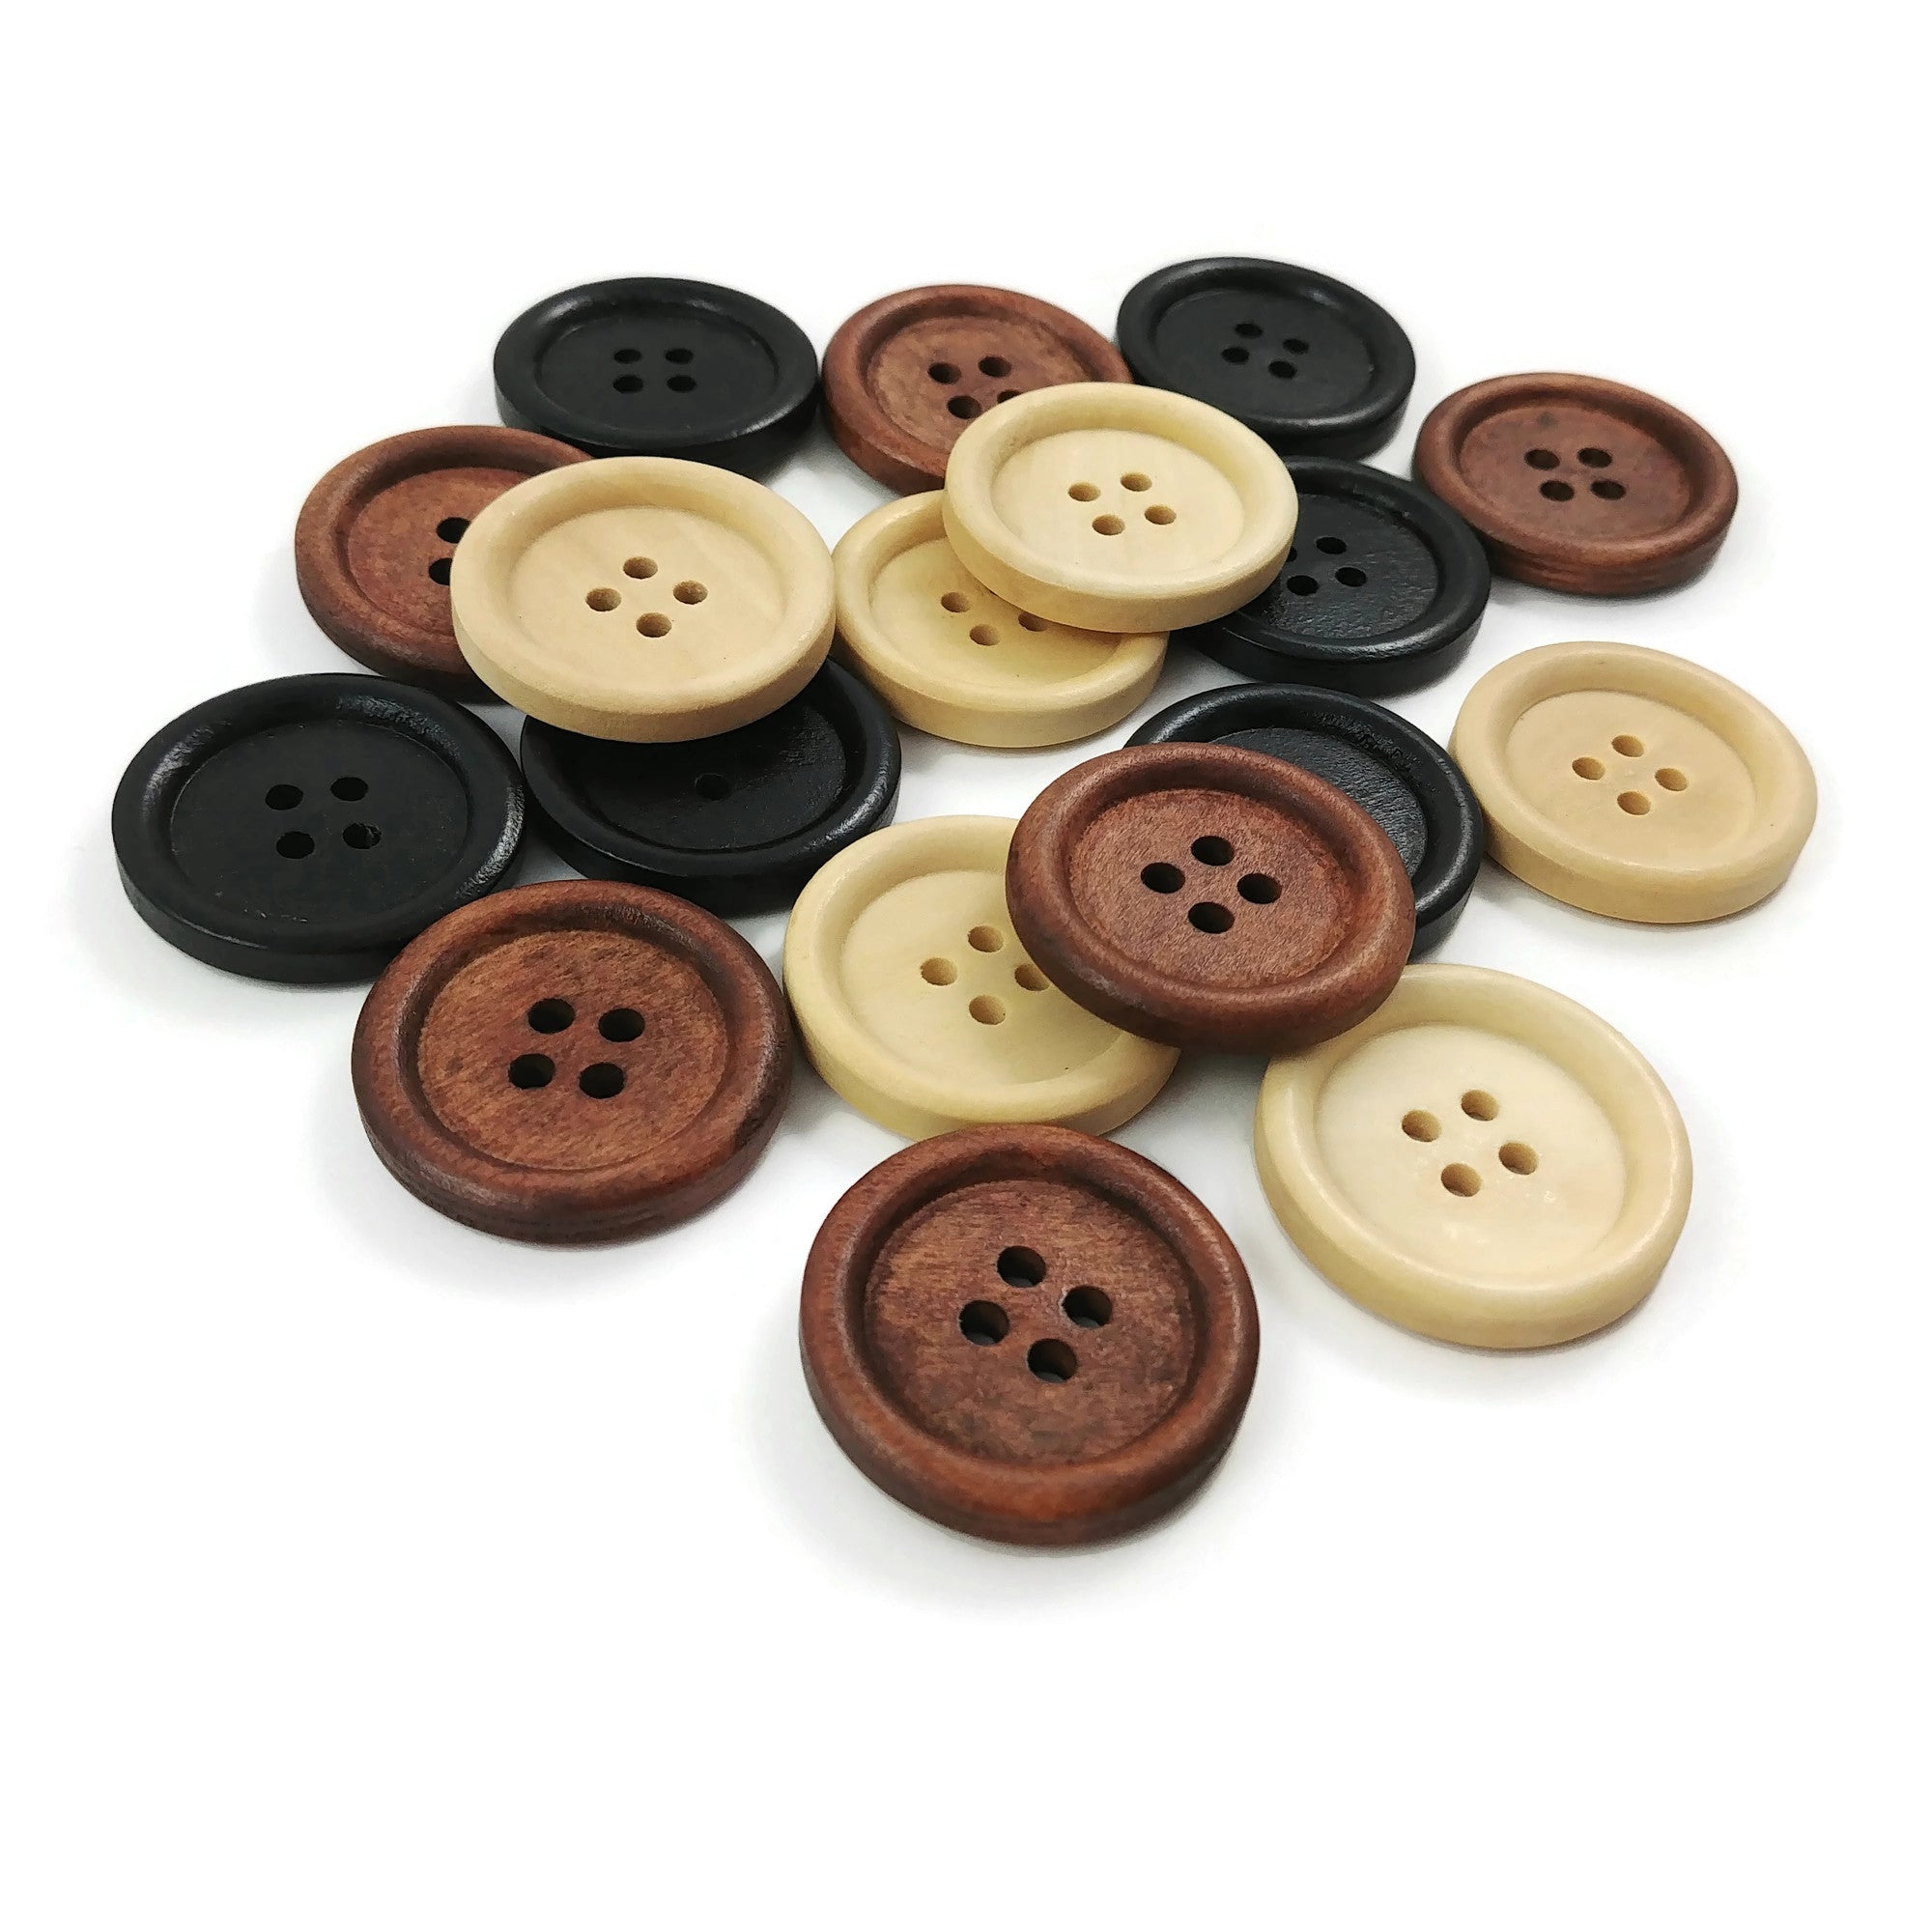 25 19mm Wooden Snowflake Buttons Two Hole Buttons Brown Wood Buttons